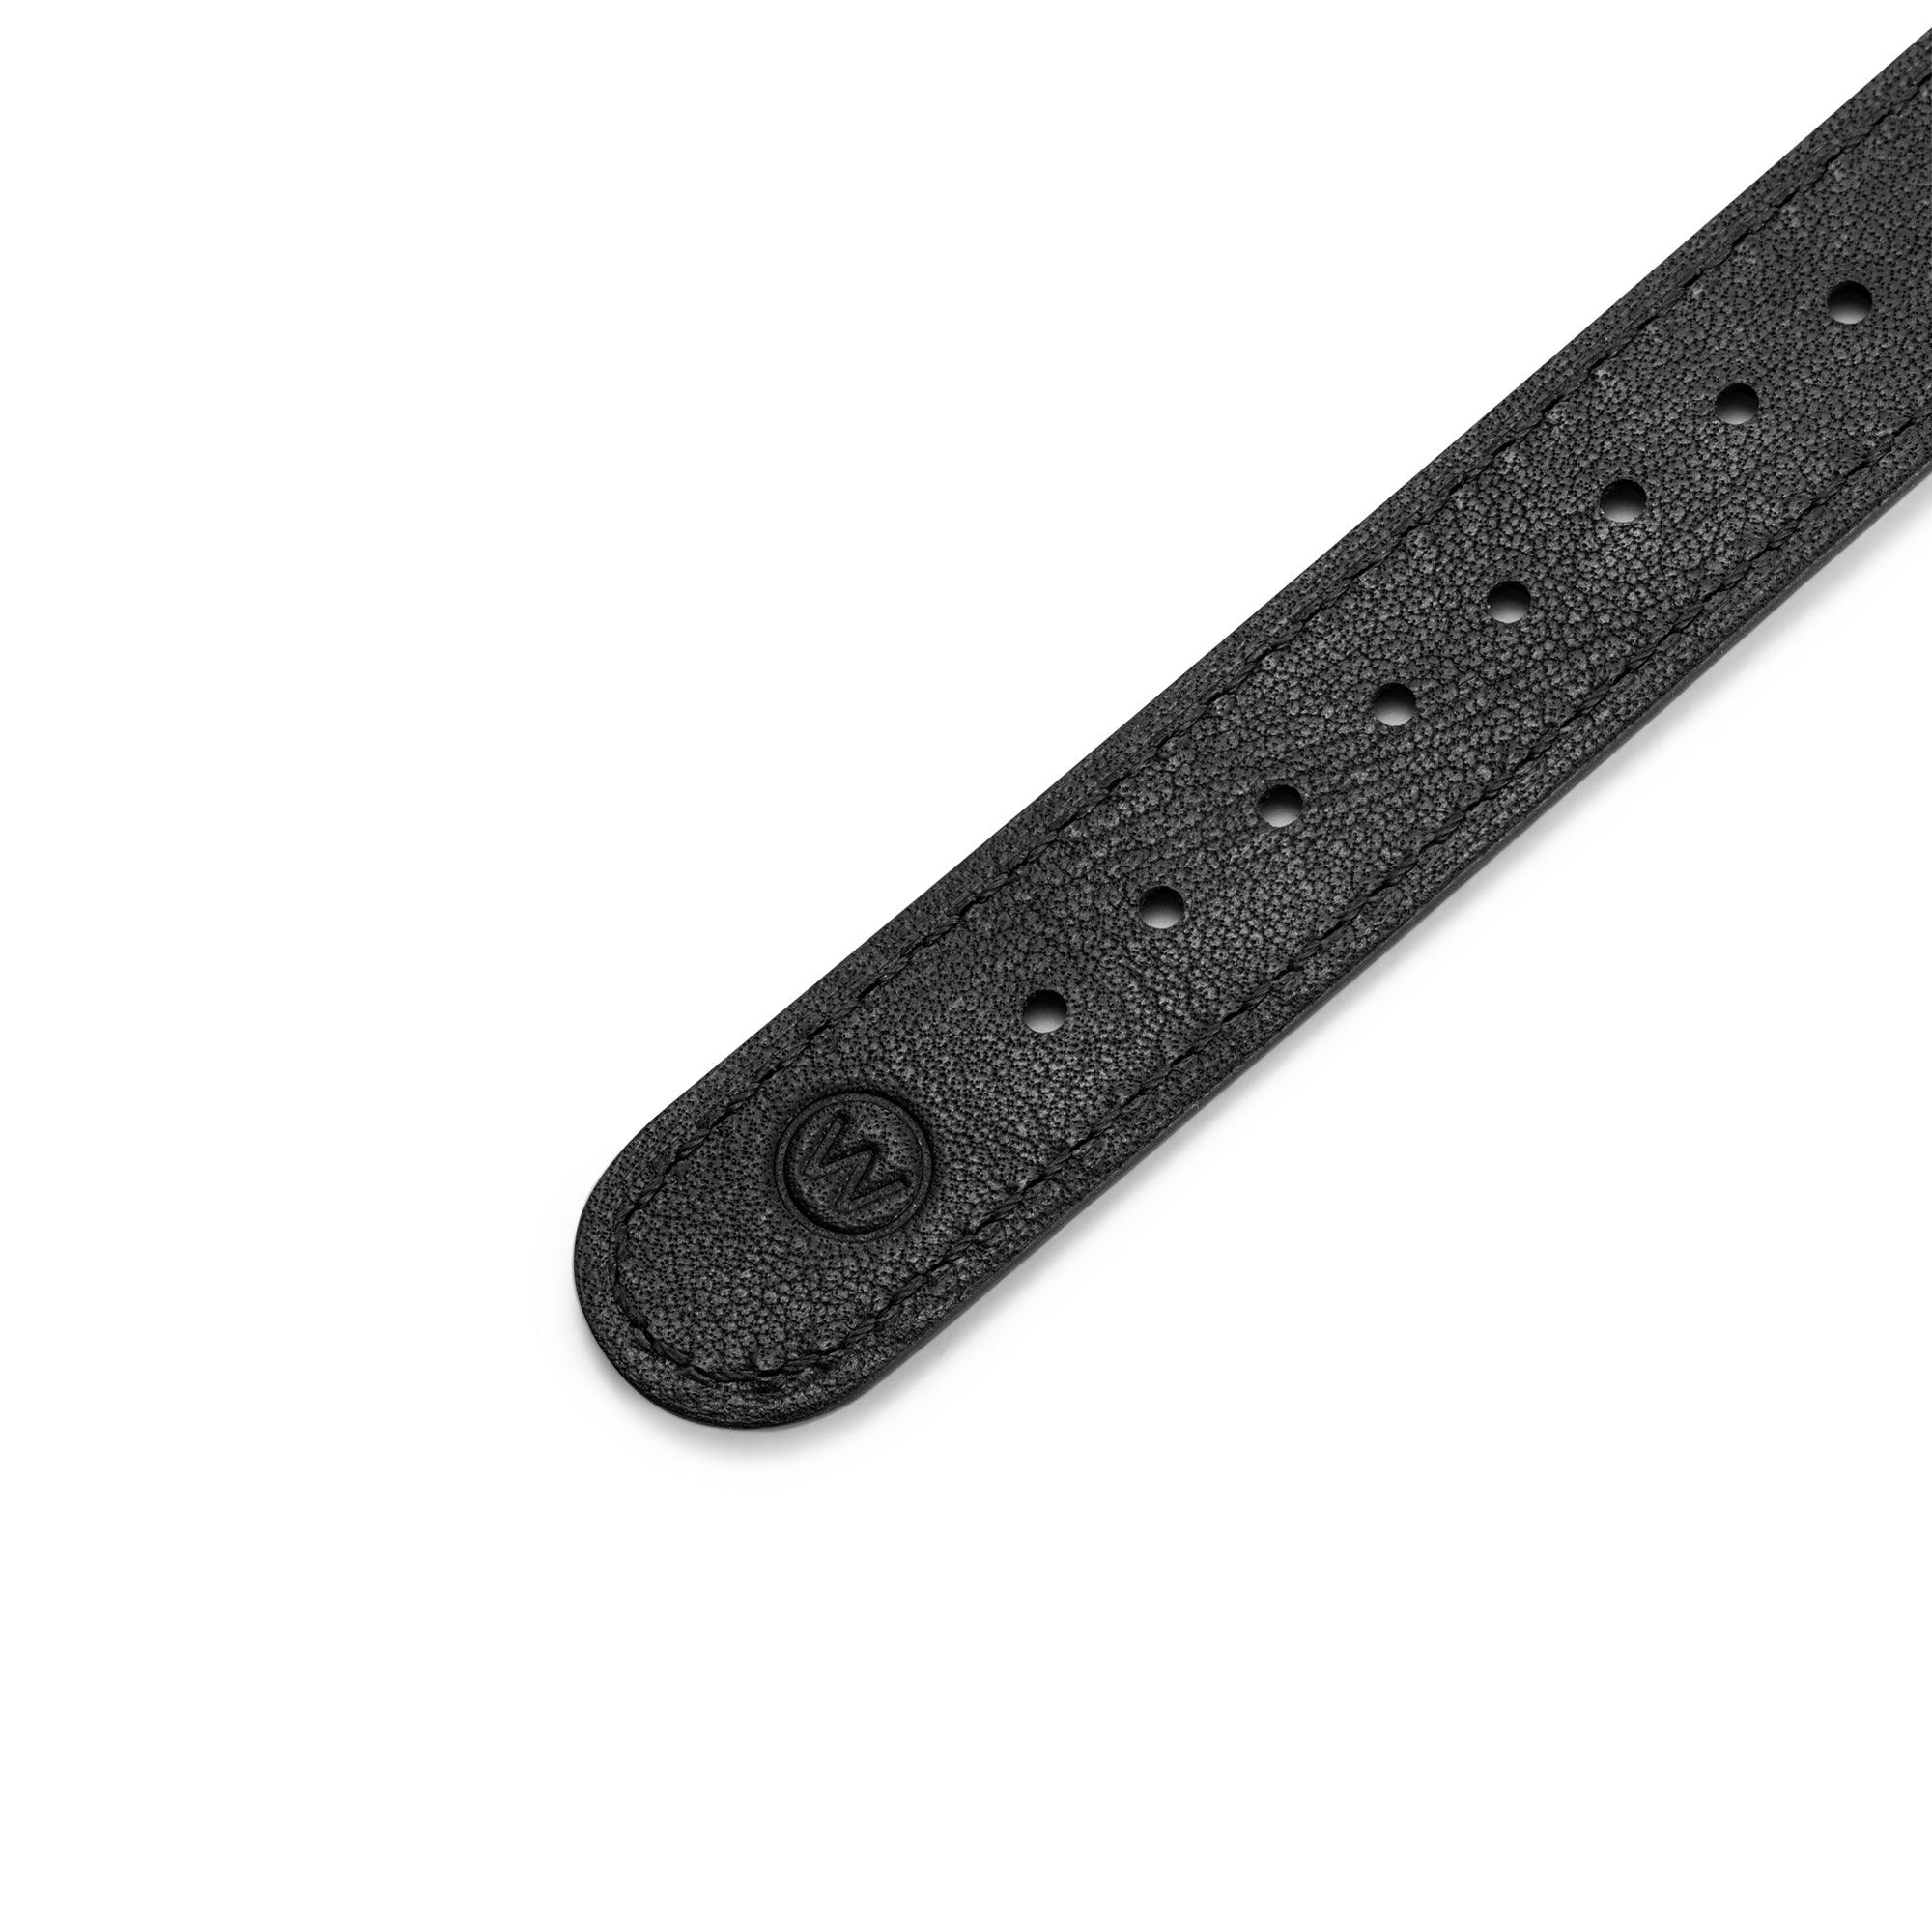 One-Piece Black Tapered Leather Band & Steel Buckle